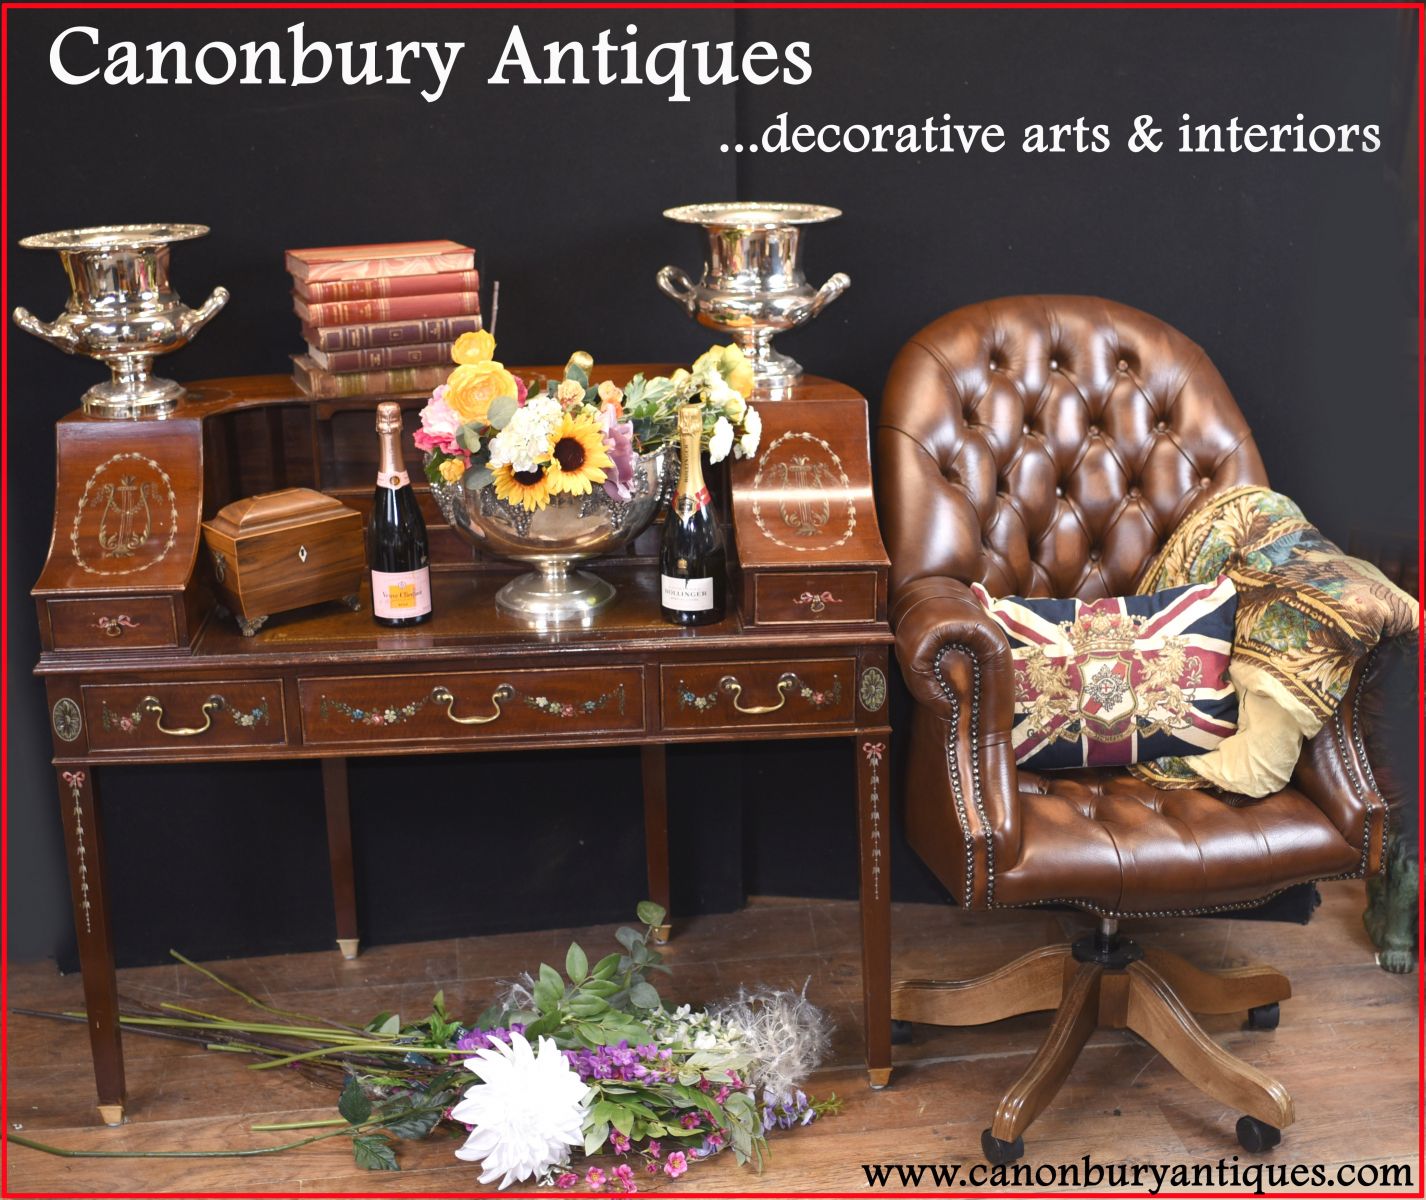 Decorative arts and interiors at our North London antiques shop